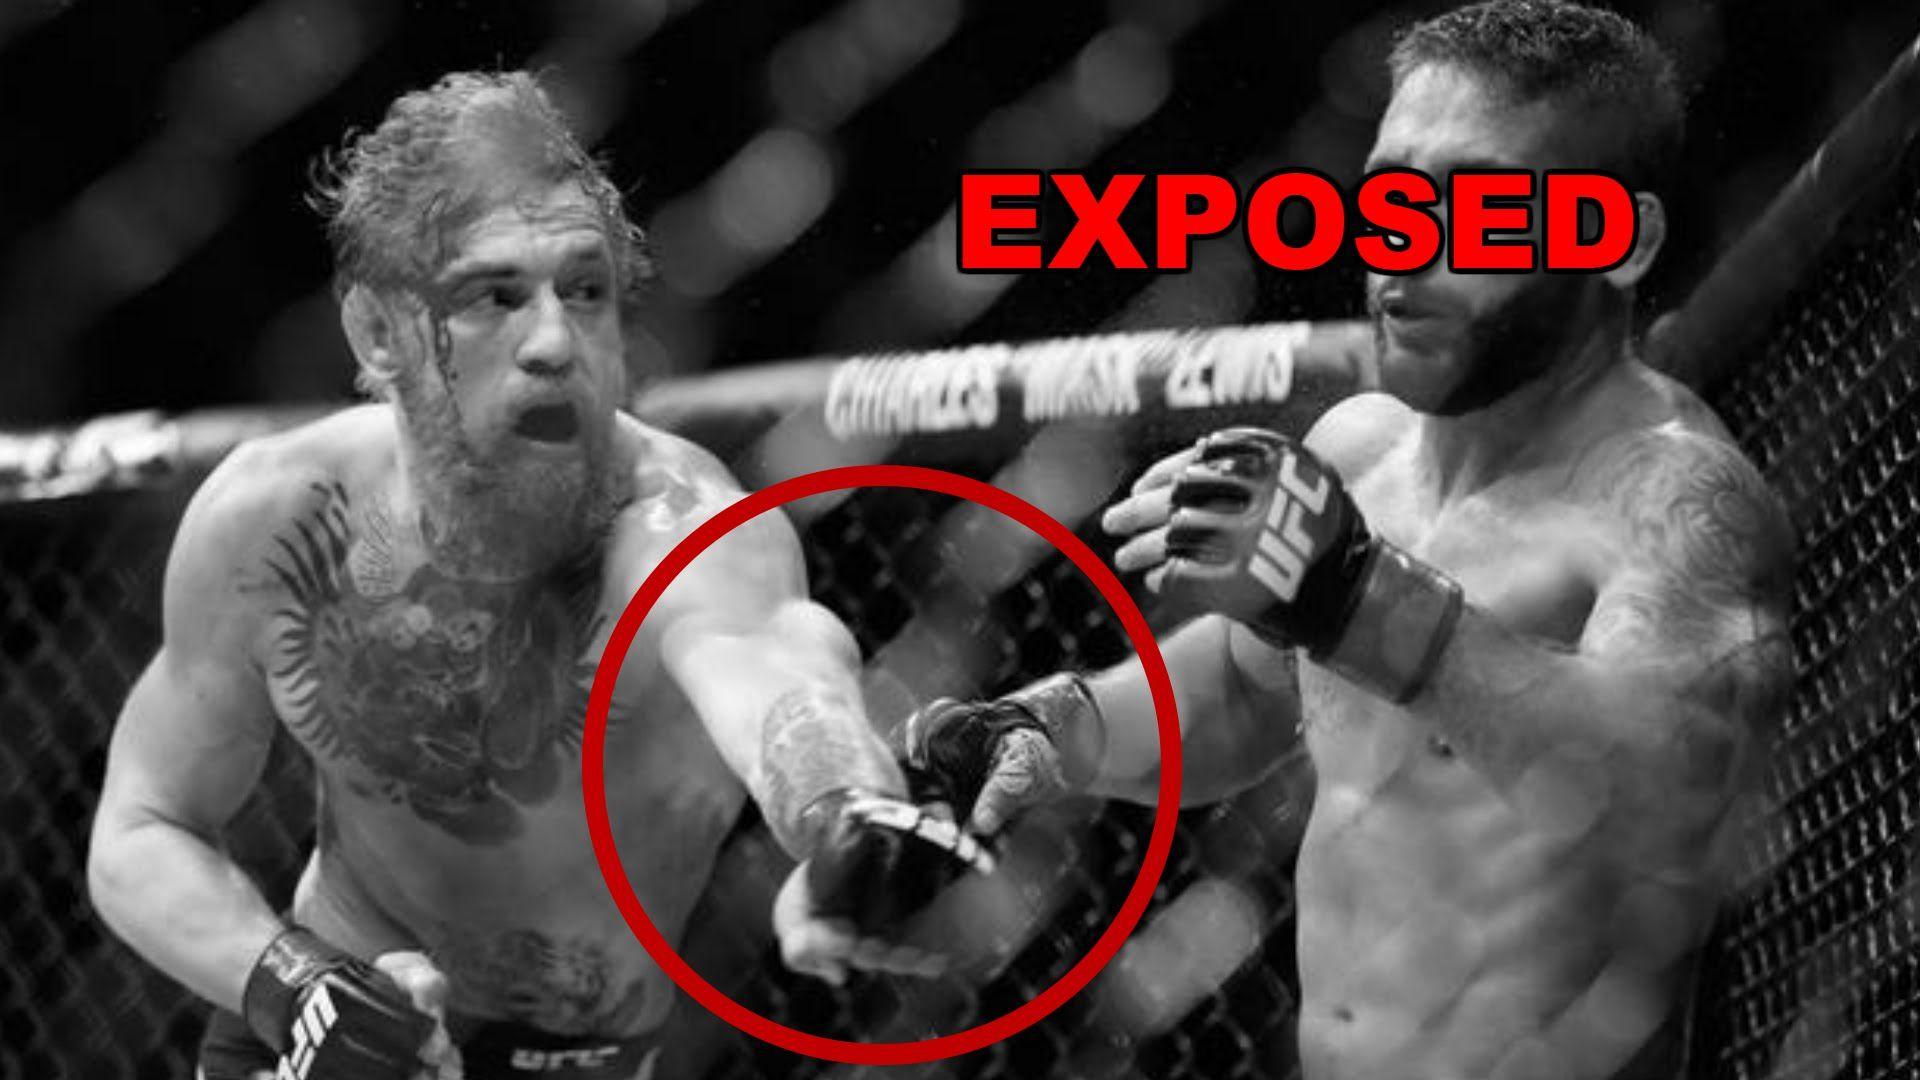 Conor McGregor EXPOSED for CHEATING at UFC 202